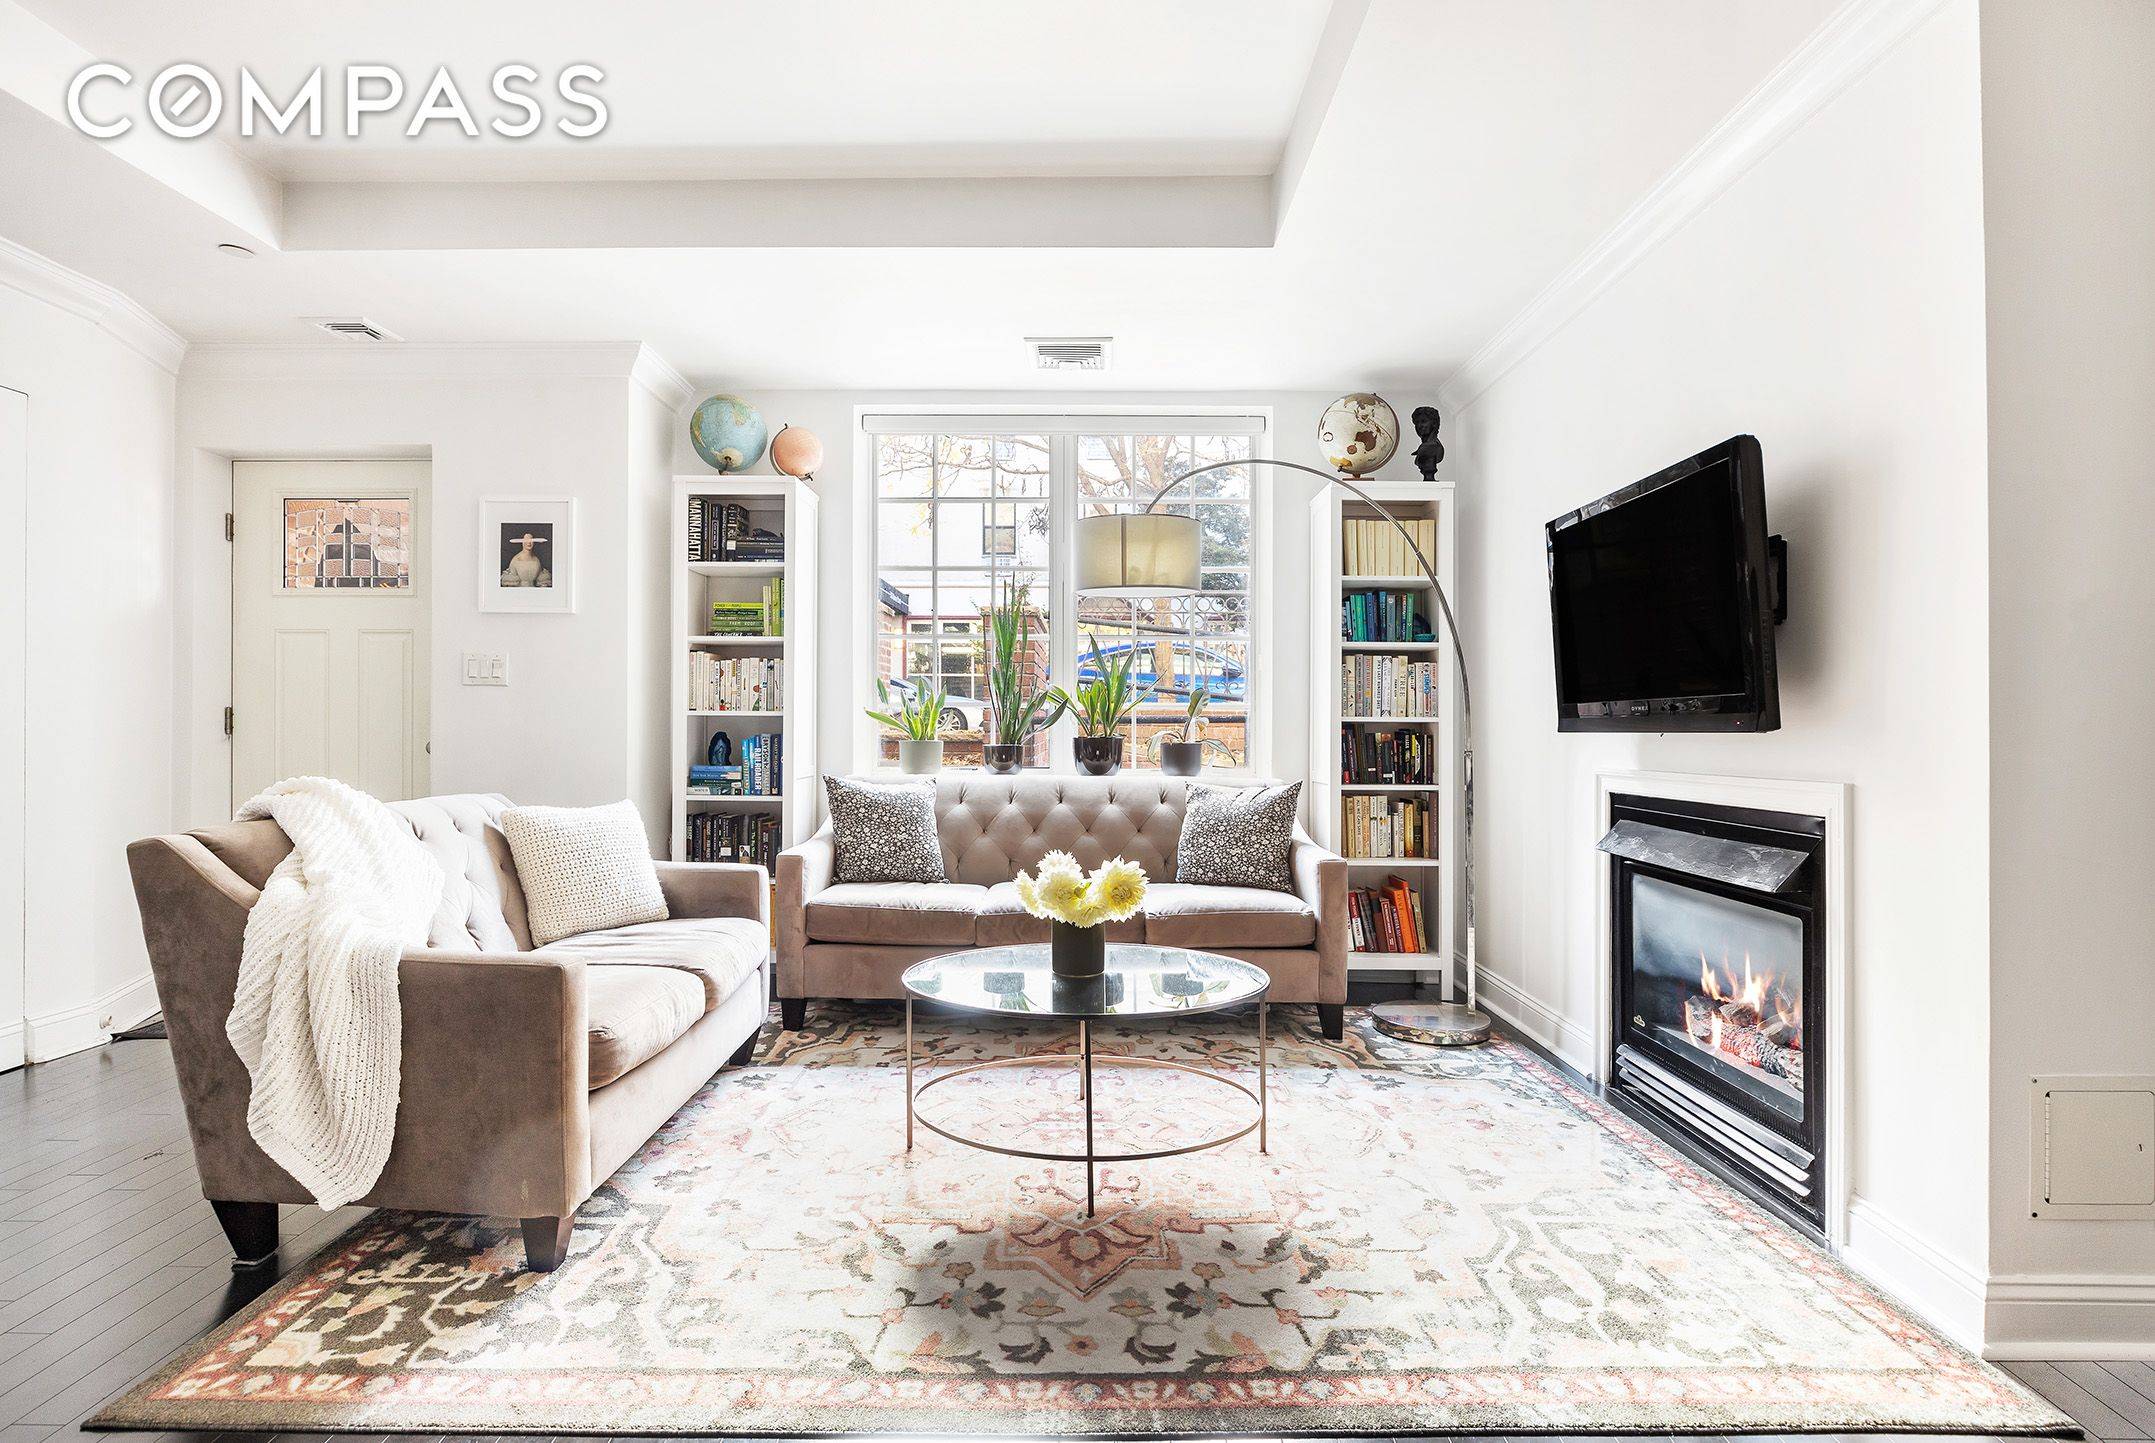 Welcome to 305 Warren Street, 1, a 2BR 2BA Cobble Hill condo that truly checks off all the boxes.